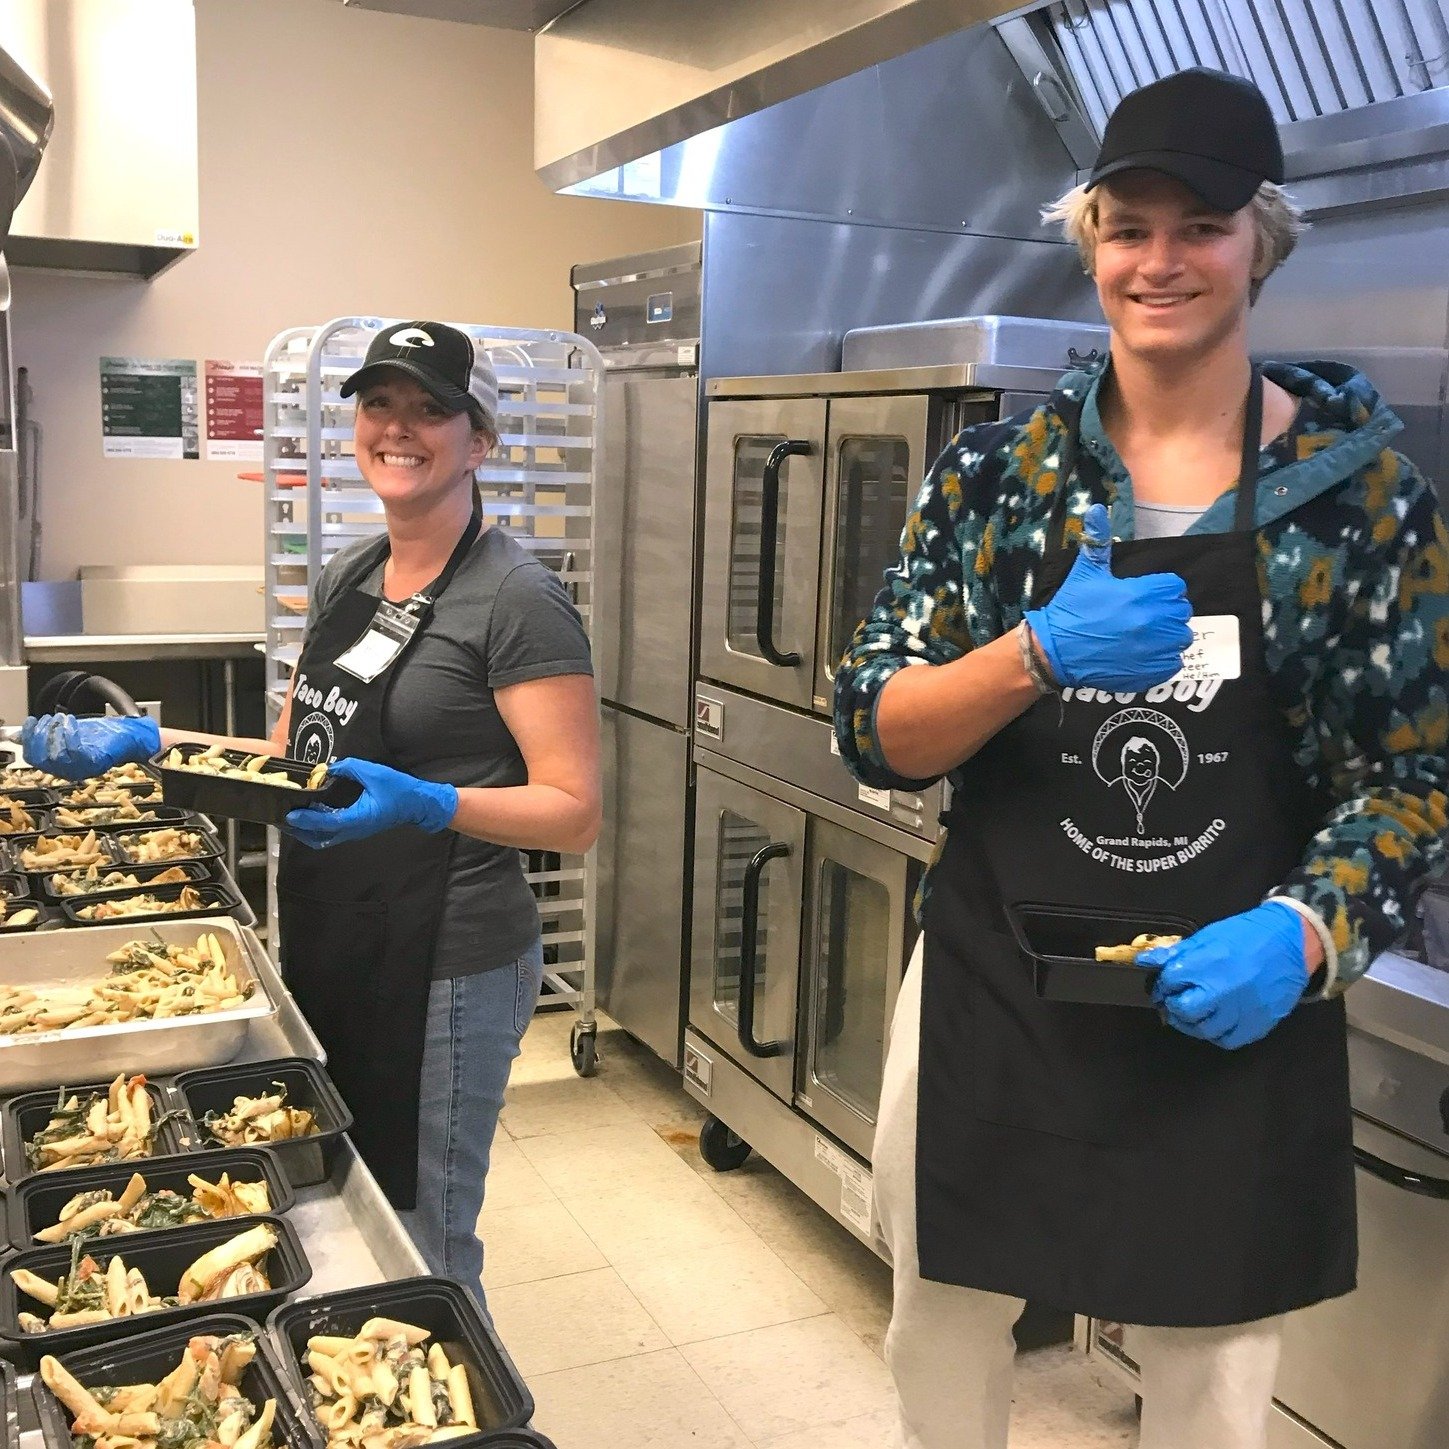 Revive &amp; Thrive Project is on the search for a couple of very special volunteers to help with our teen program! If you enjoy working with teens and love to cook/bake, please consider joining our team as an adult mentor volunteer. Please visit www